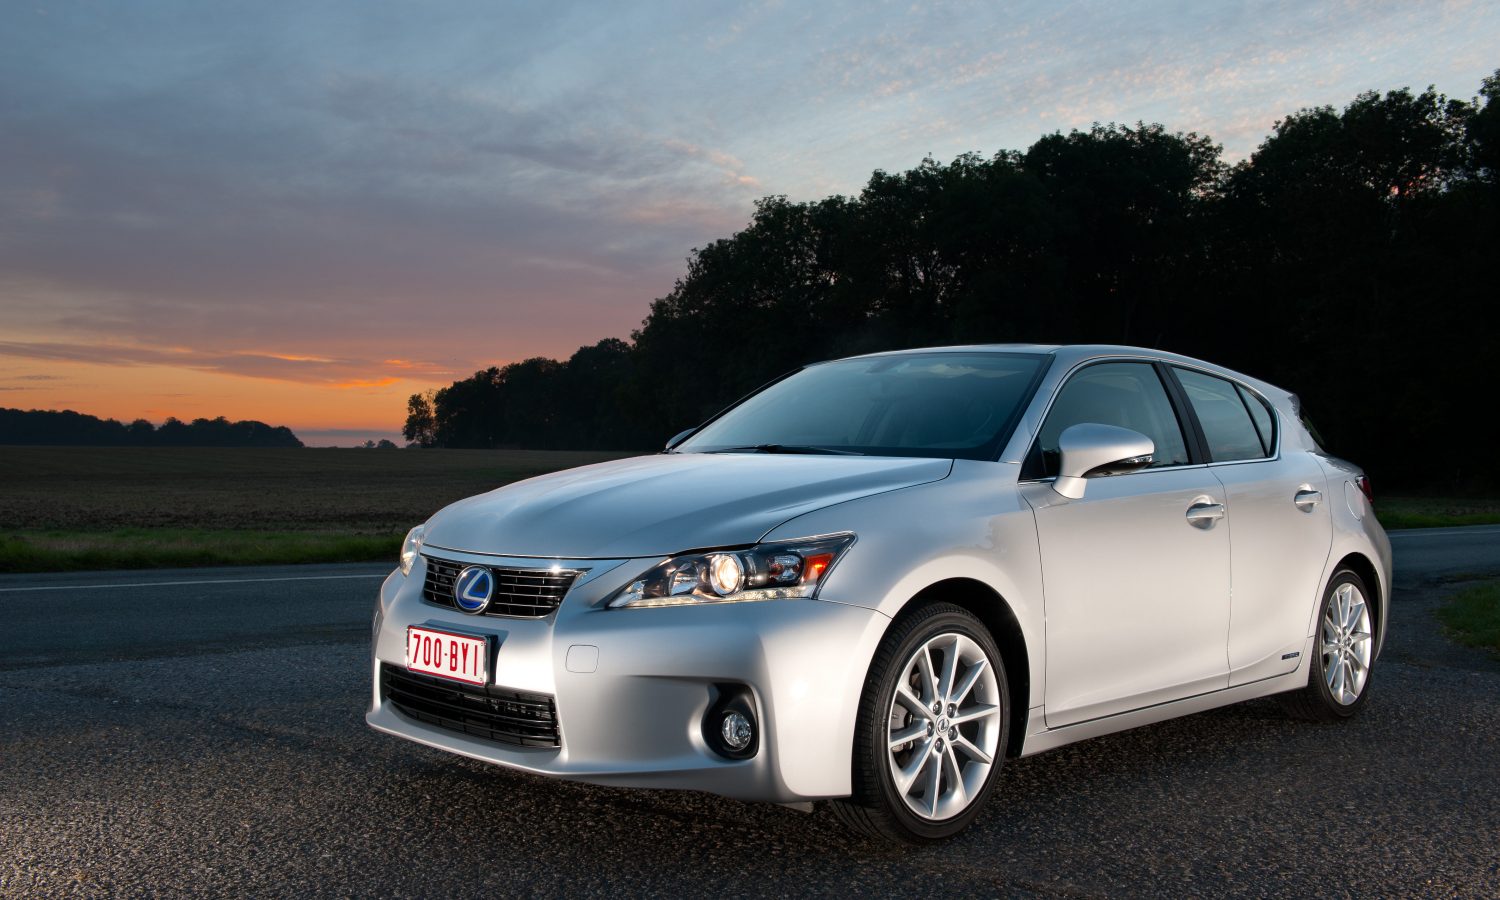 All-New Lexus 2011 CT 200h Receives Top Safety Pick Rating for Crash Tests  - Lexus USA Newsroom